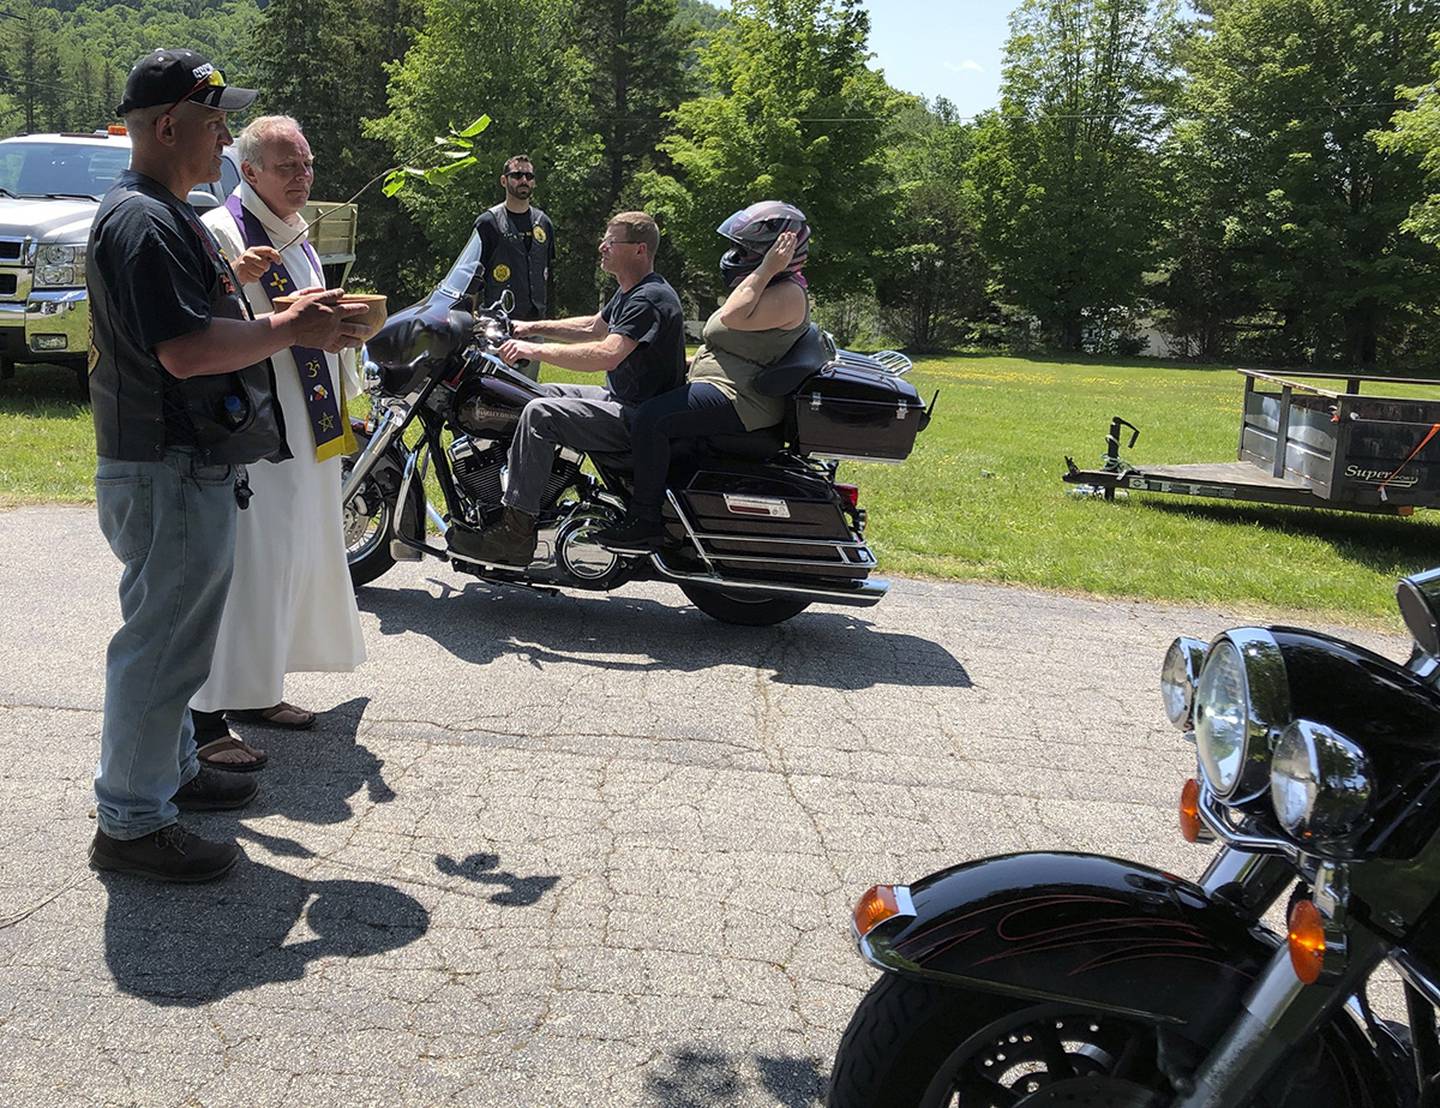 Motorcyclists participate in a "Blessing of the Bikes" ceremony in Columbia, N.H., Sunday, June 23, 2019.